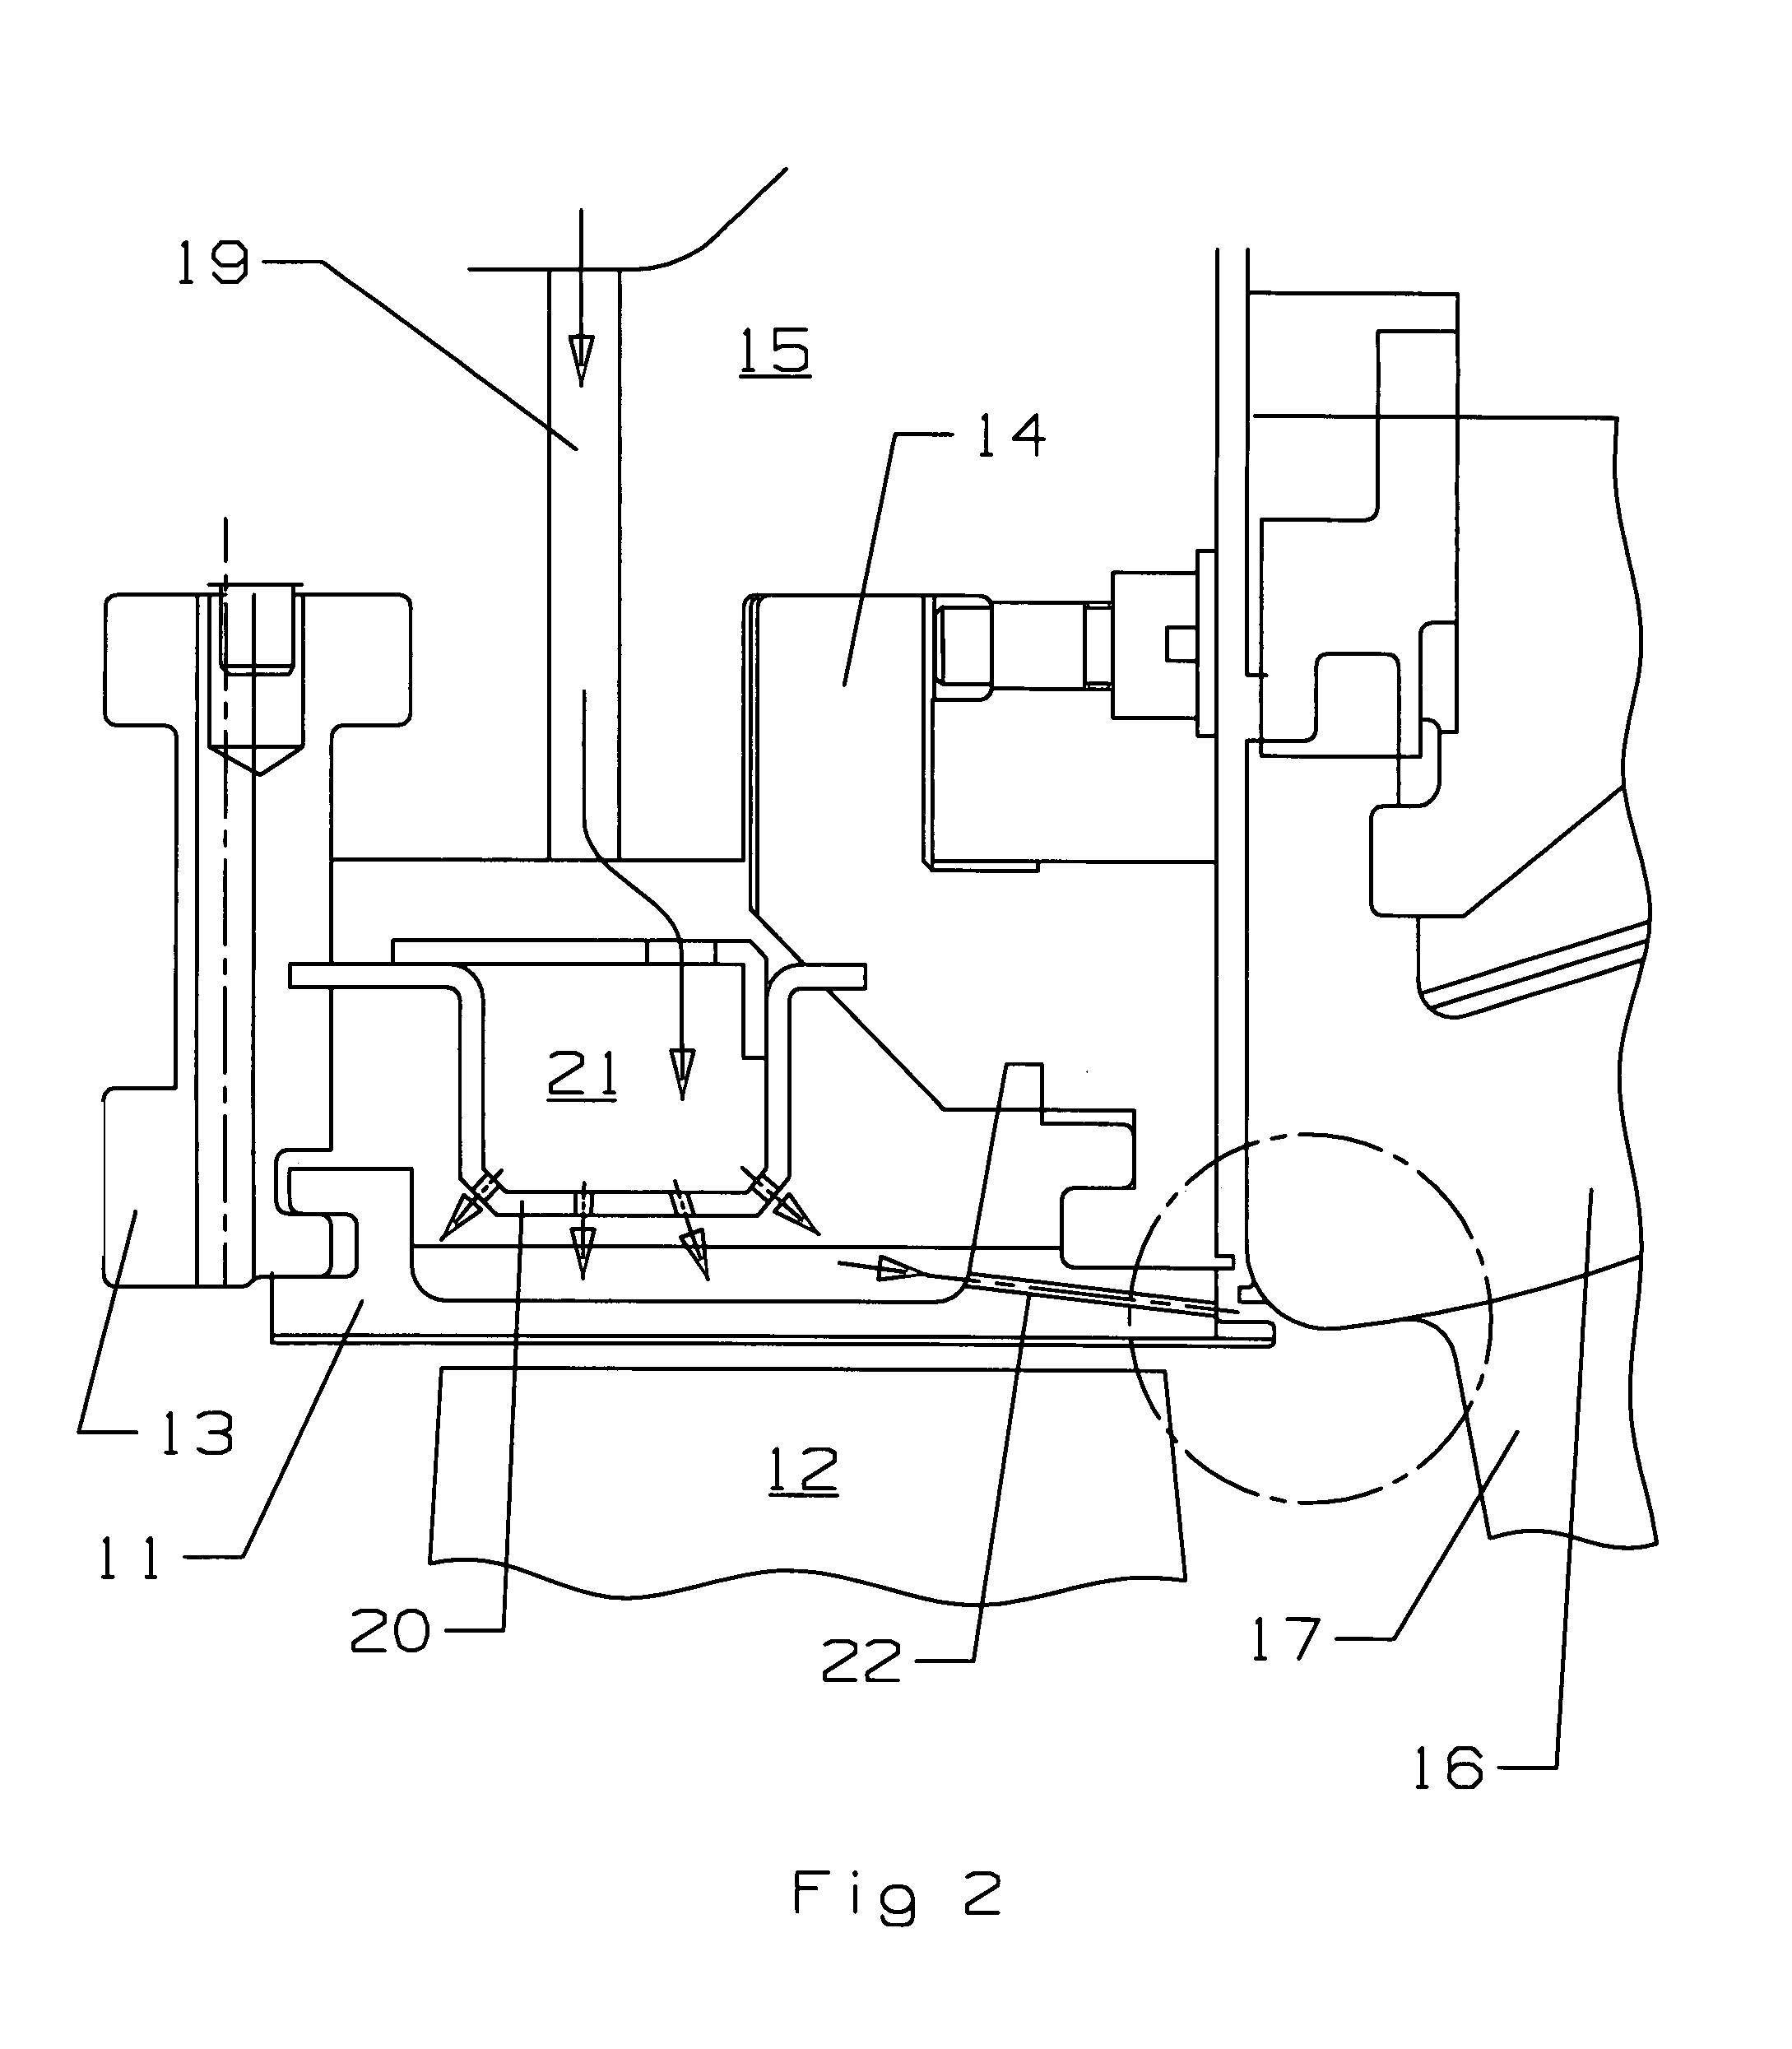 Turbine inter-stage gap cooling and sealing arrangement